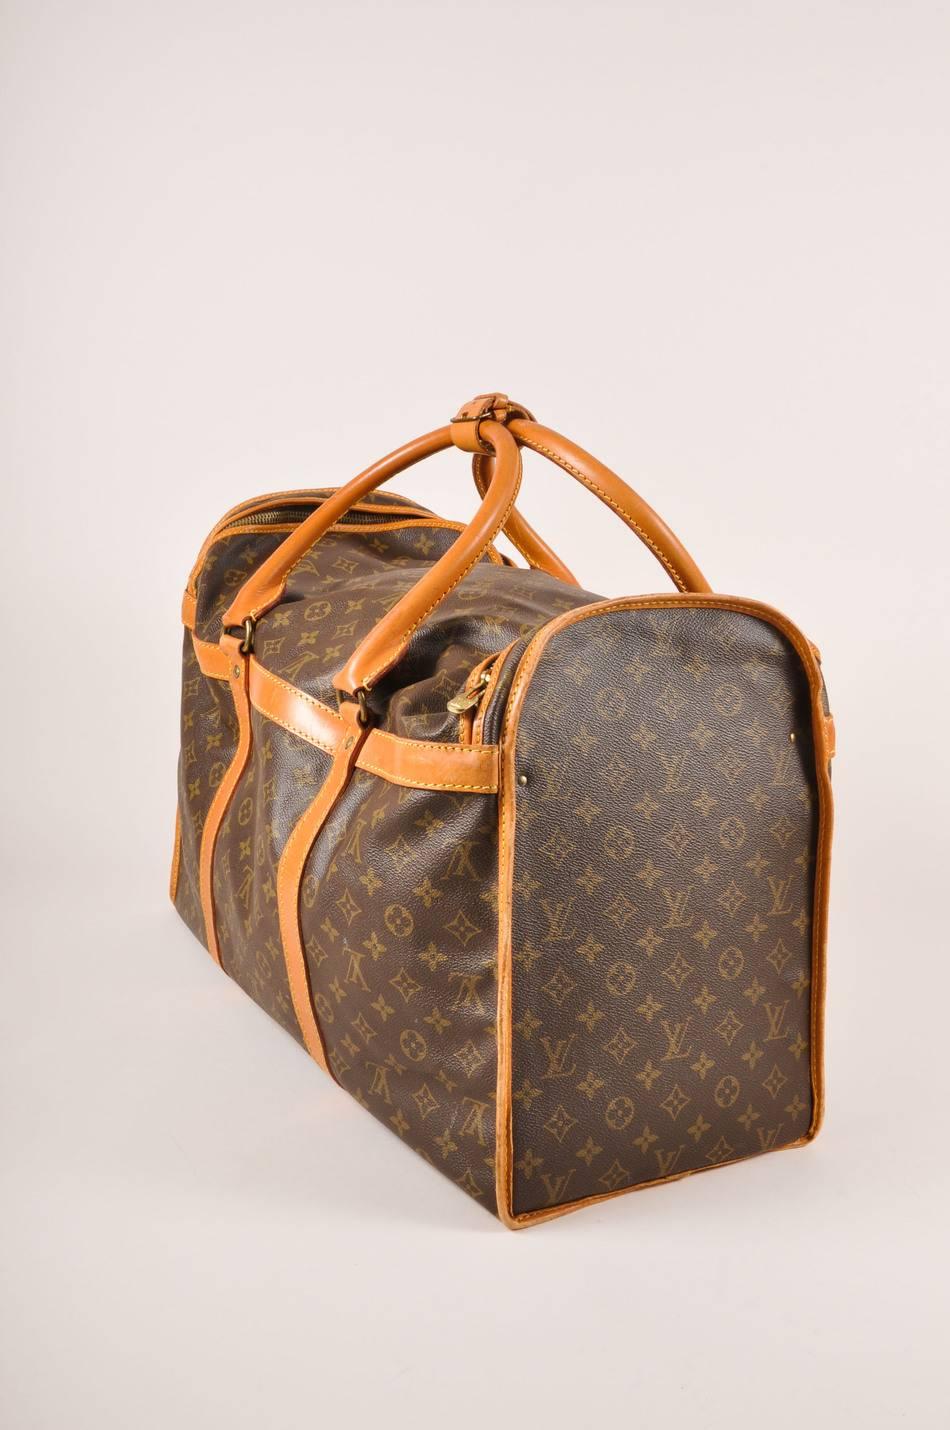 Color: Brown, Tan

Made In: France

Fabric Content: Coated Canvas, Leather, Textile

Item Specifics & Details: Hard case duffel bag.Brown and tan monogram coated canvas with tan leather trim.Two top handles with brass tone links and belt